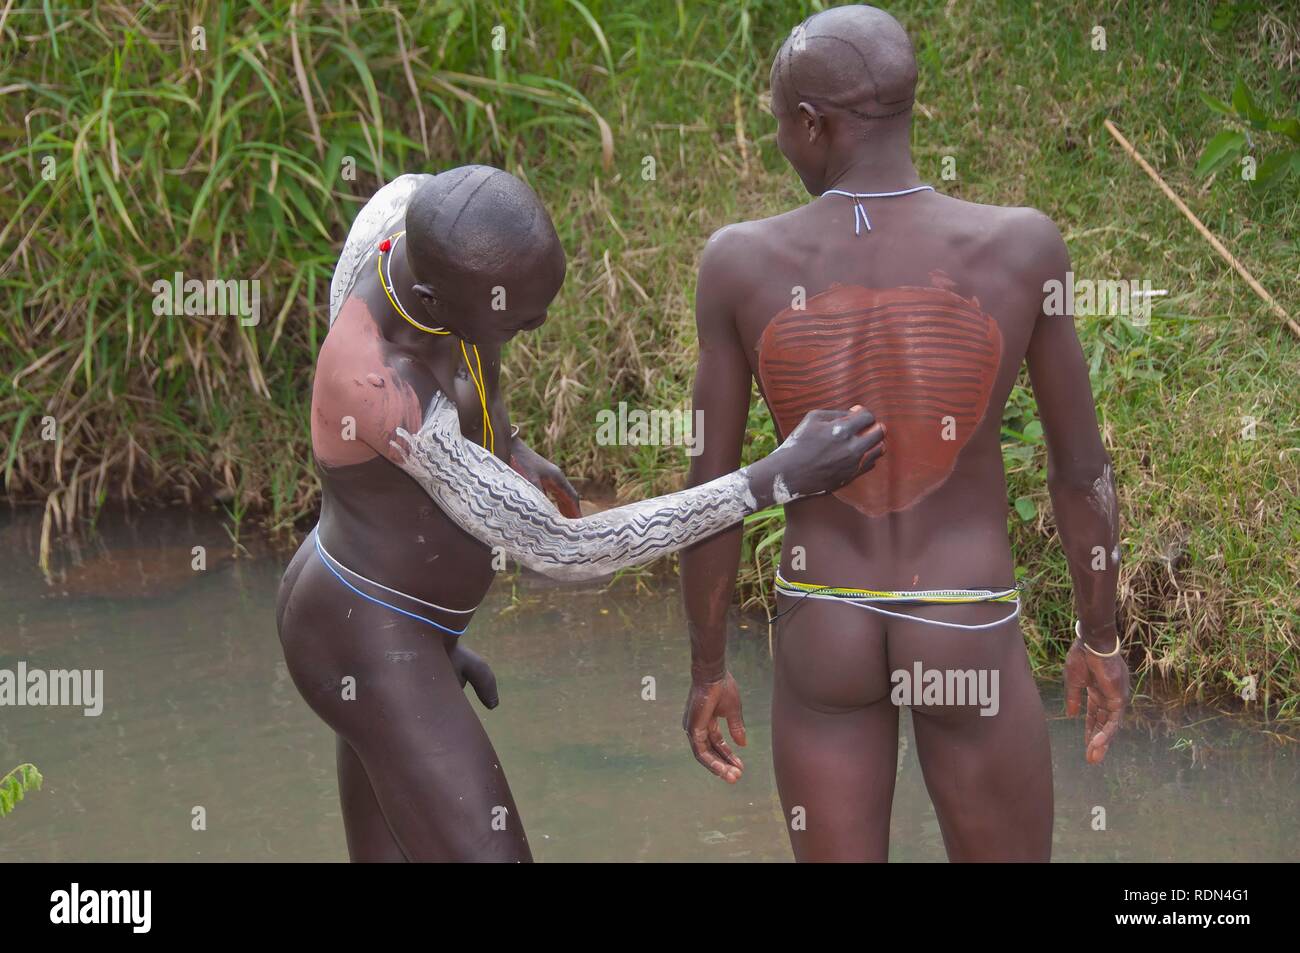 Before the Donga stick fight, the Surma warriors apply a body paint made of clay and minerals on their bodies, Surma tribe Stock Photo